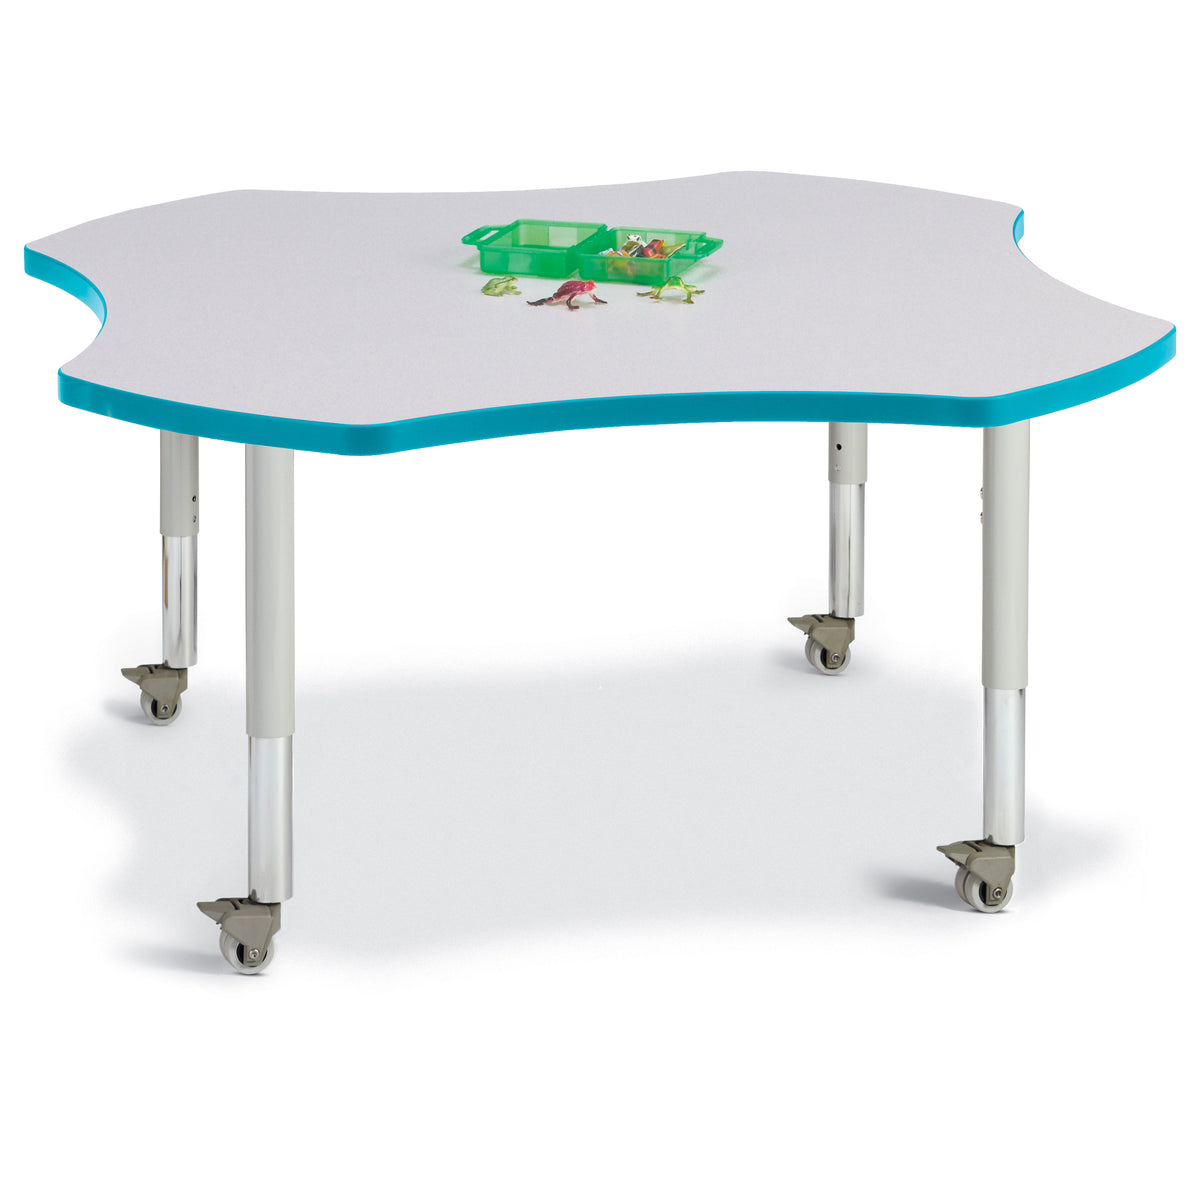 6453JCM005, Berries Four Leaf Activity Table, Mobile - Freckled Gray/Teal/Gray